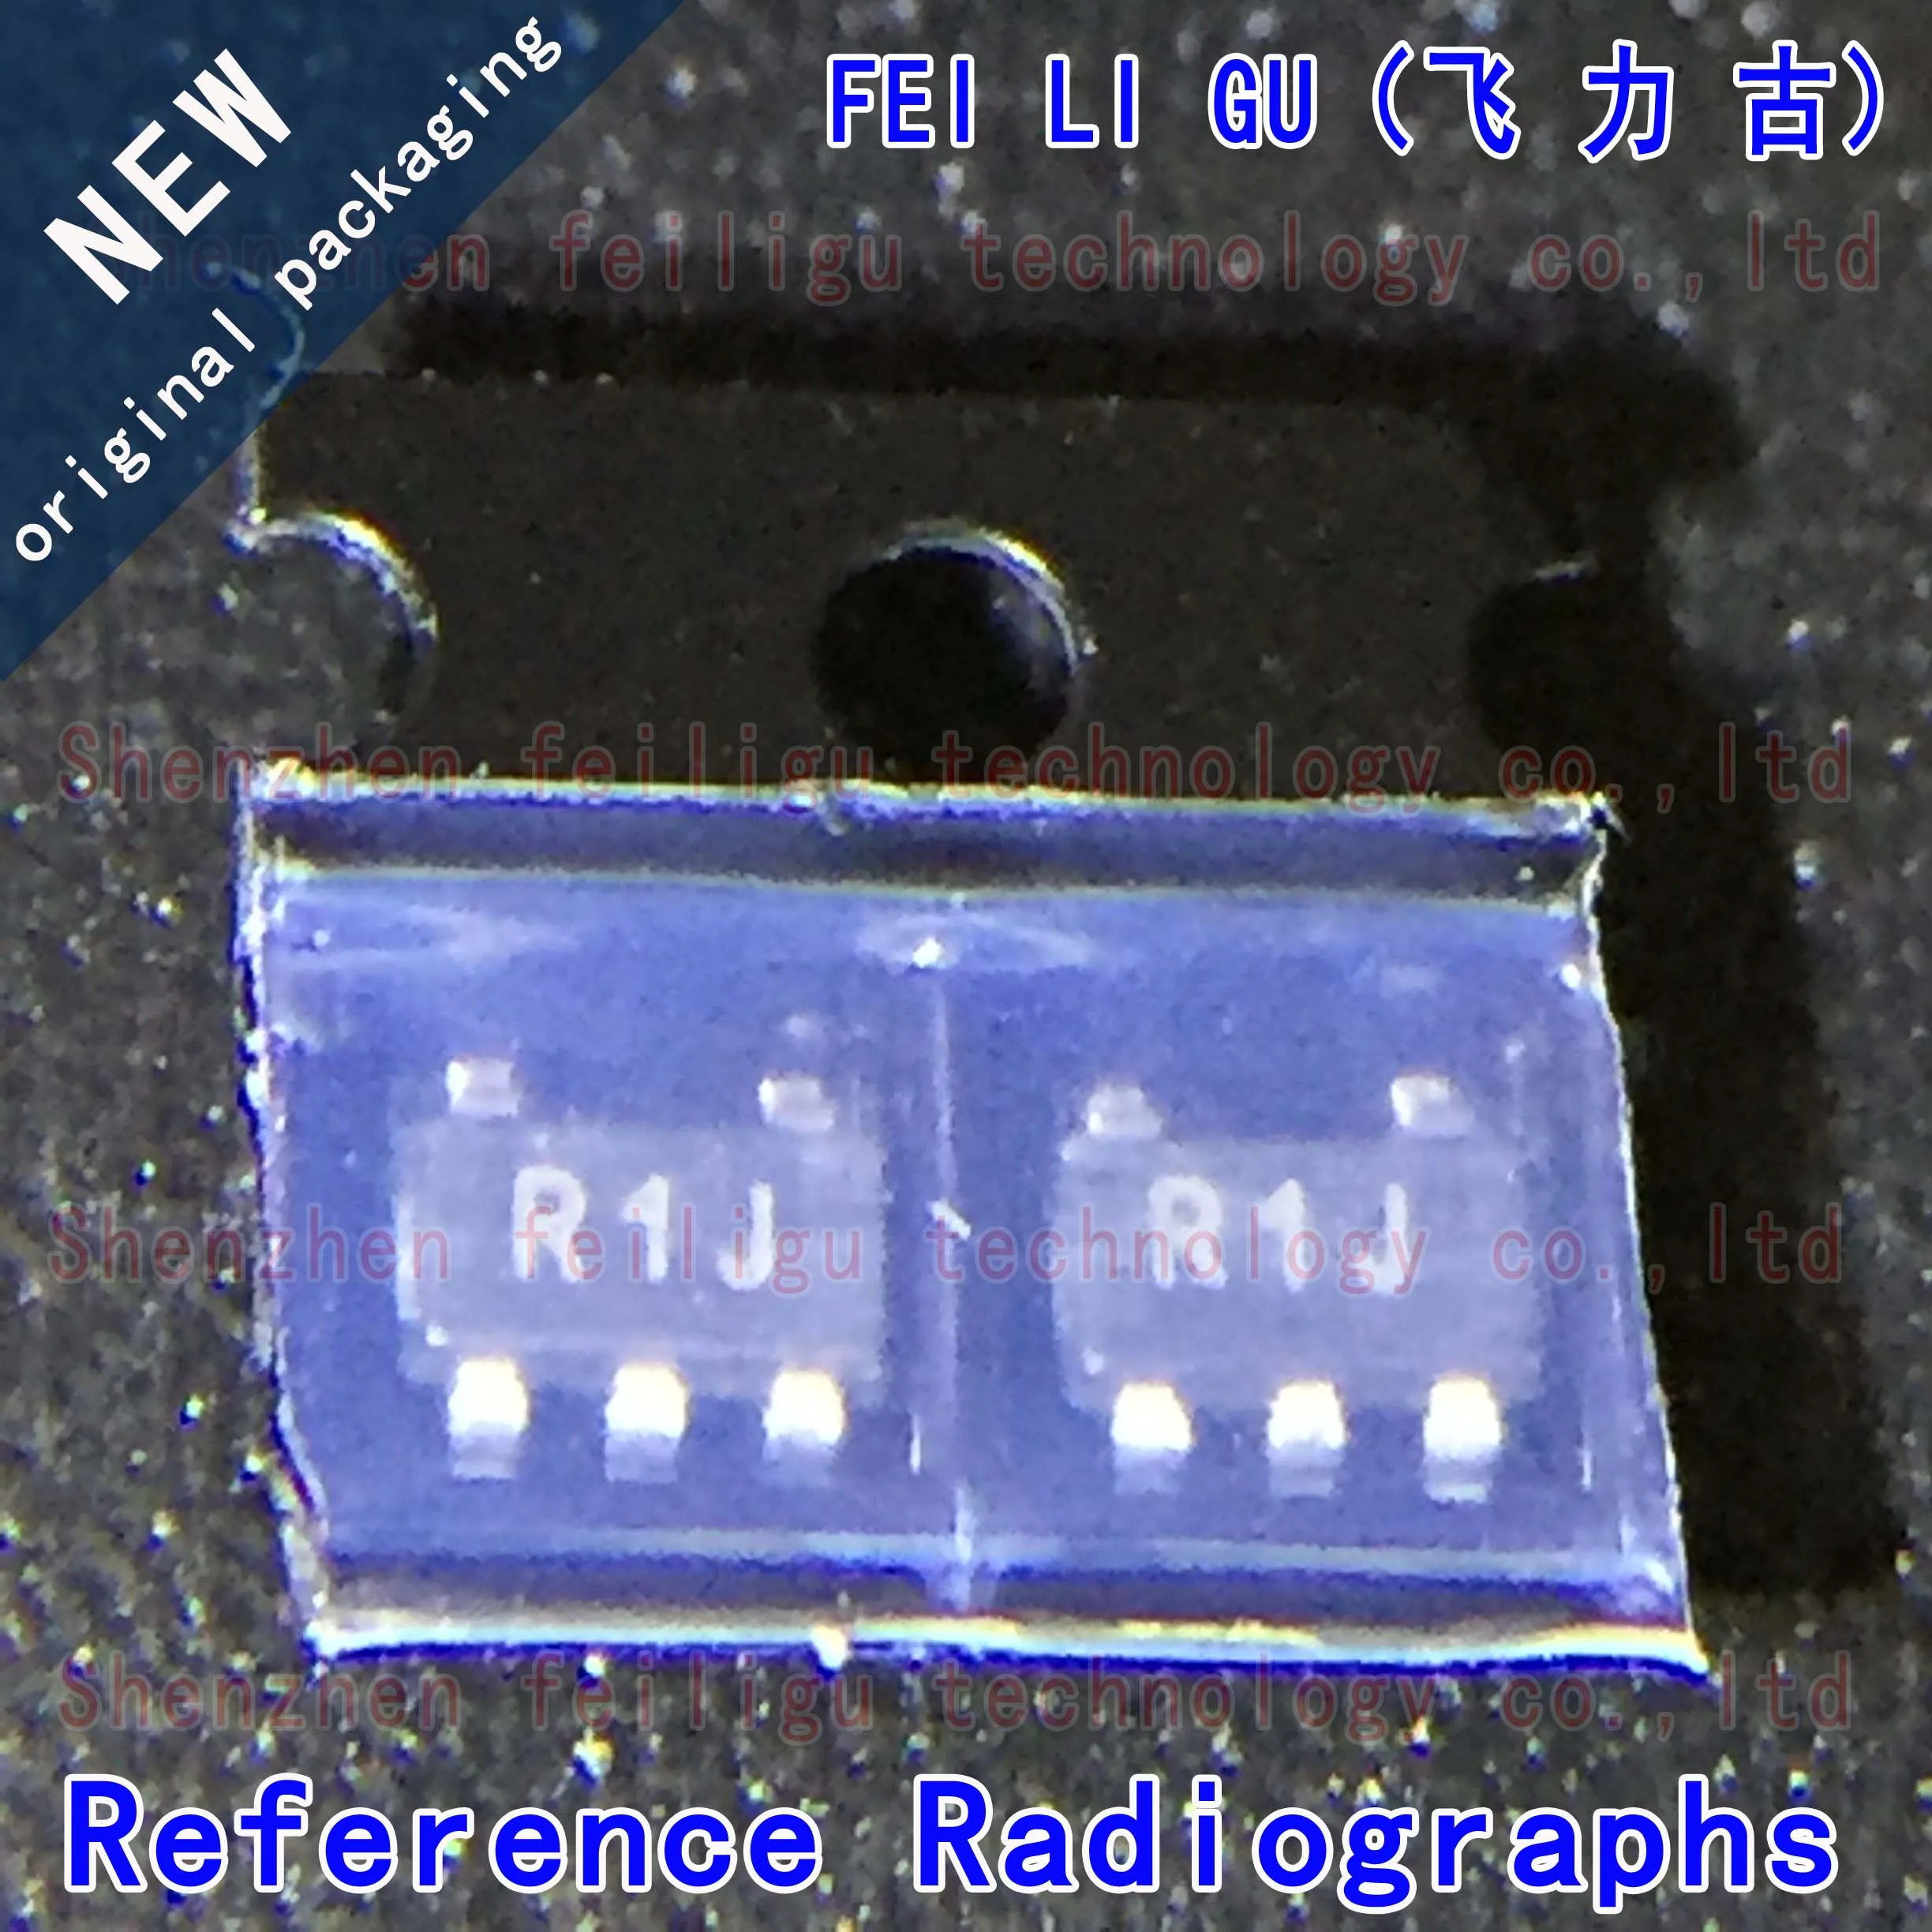 new original tpc6108 screen printing s3h package sot23 5 notebook application p channel small signal field effect transistor 100% New original ADR03AUJZ-REEL7 ADR03AUJZ ADR03AUJ ADR03 Screen printing:R1J Package:SOT23-5 Voltage reference chip